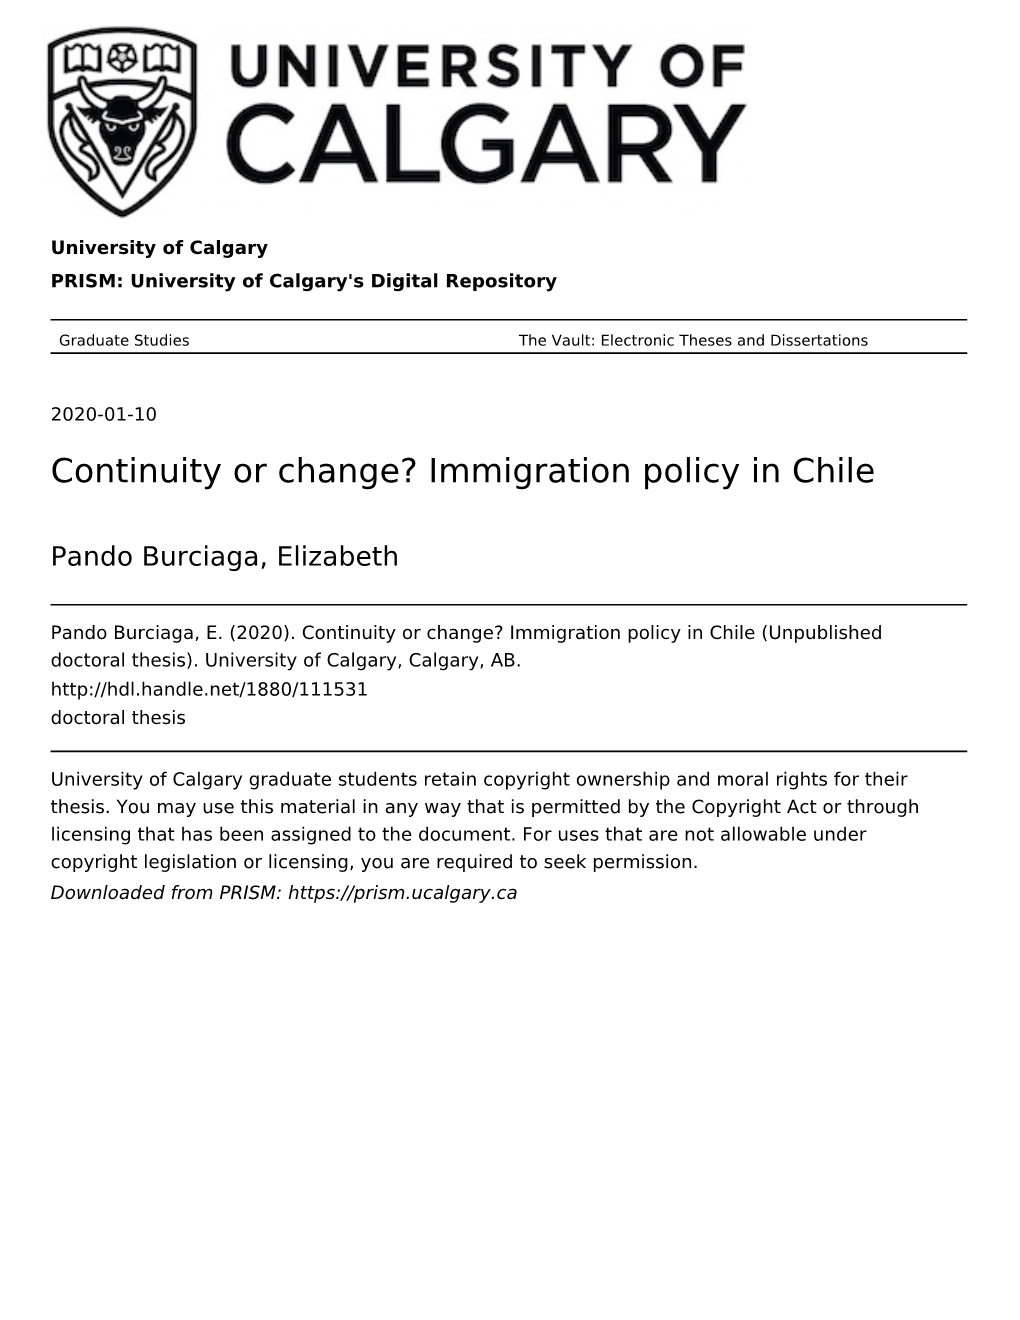 Continuity Or Change? Immigration Policy in Chile